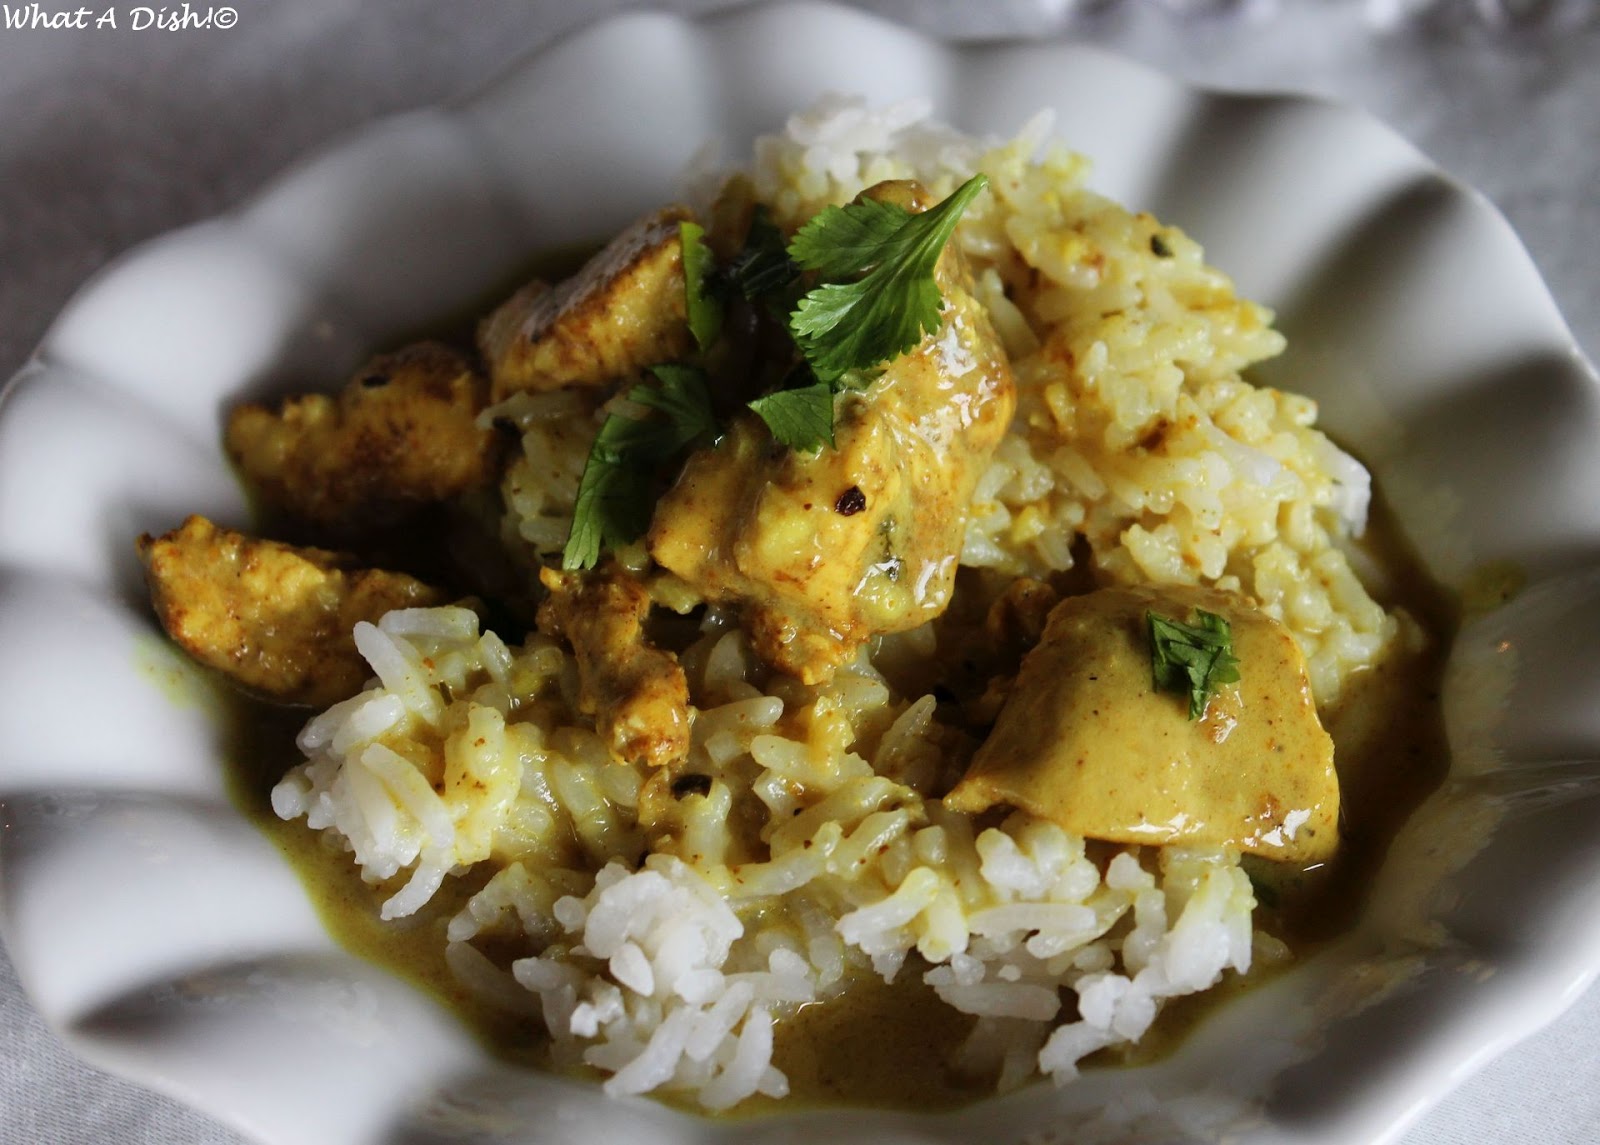 What A Dish!: Quick Chicken Curry